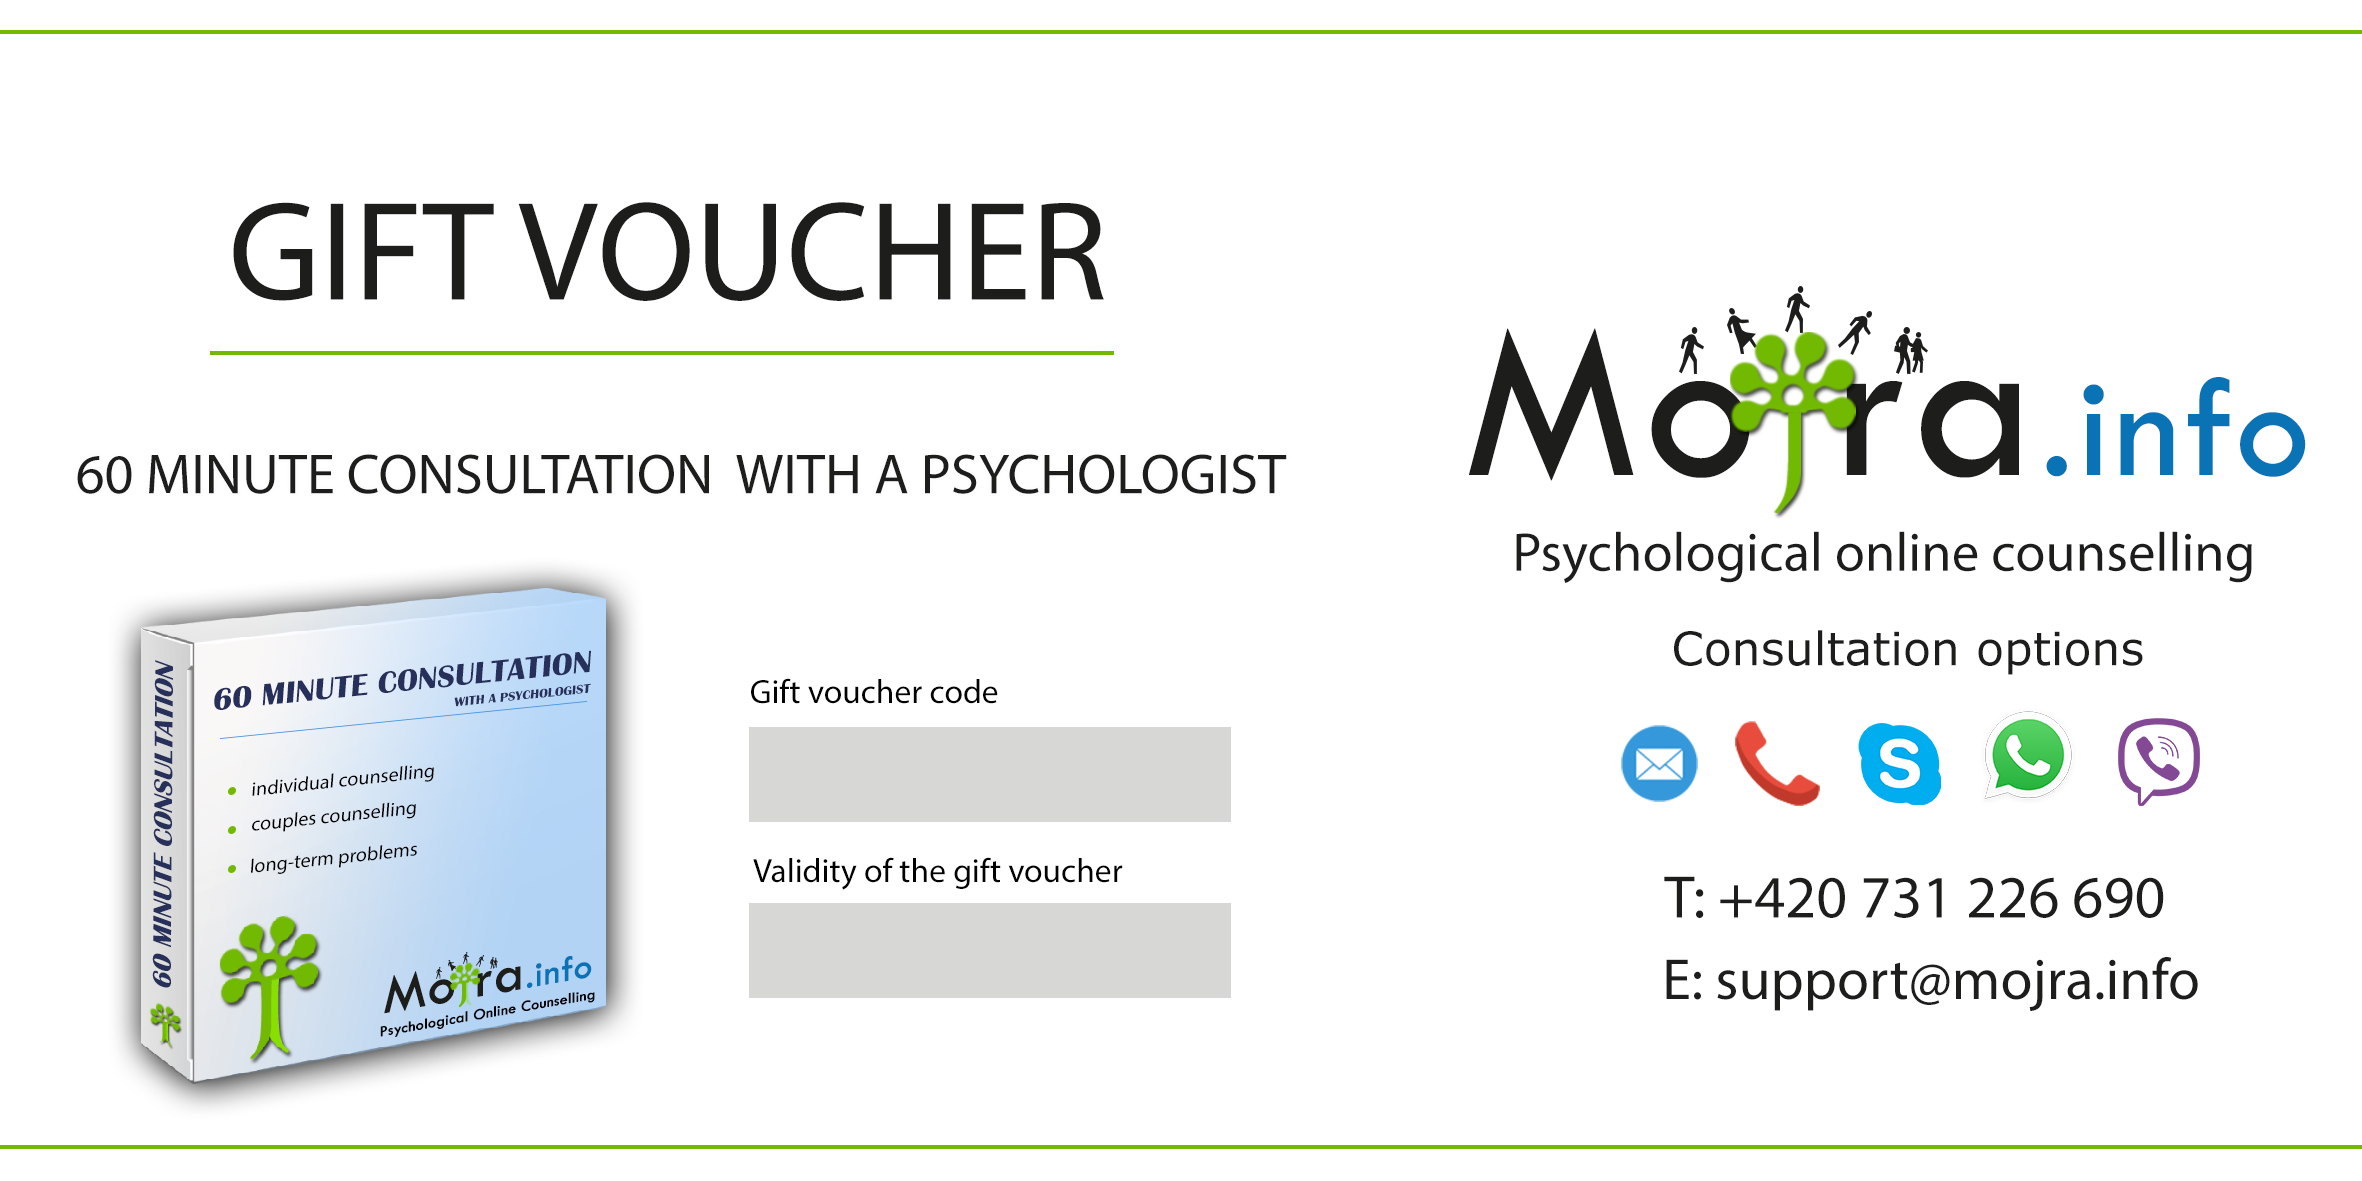 Gift Voucher: 60 minute consultation with a psychologist